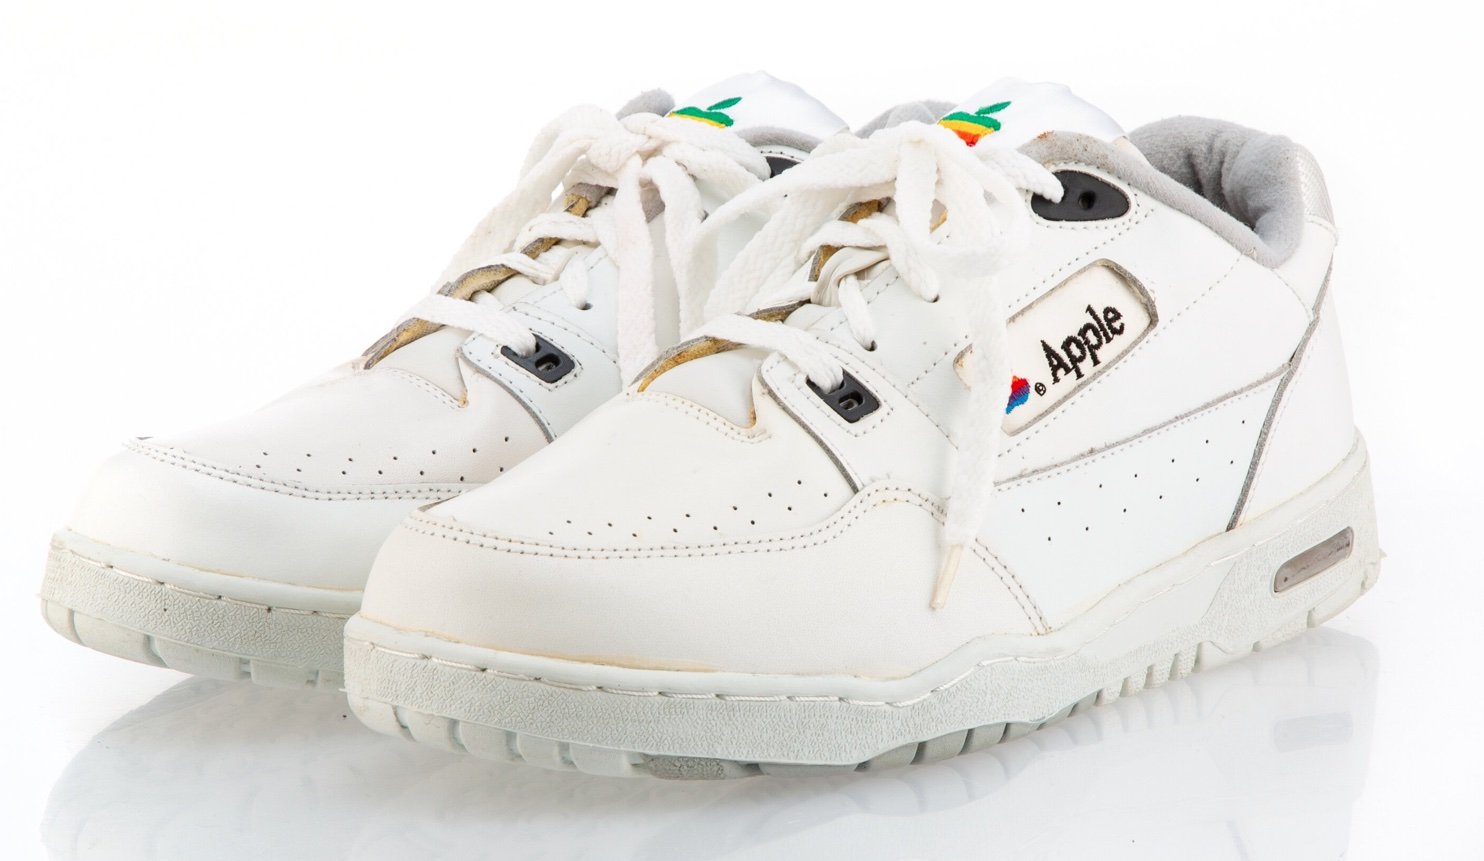 Represent with a pair of rare Apple sneakers from the 1990s 